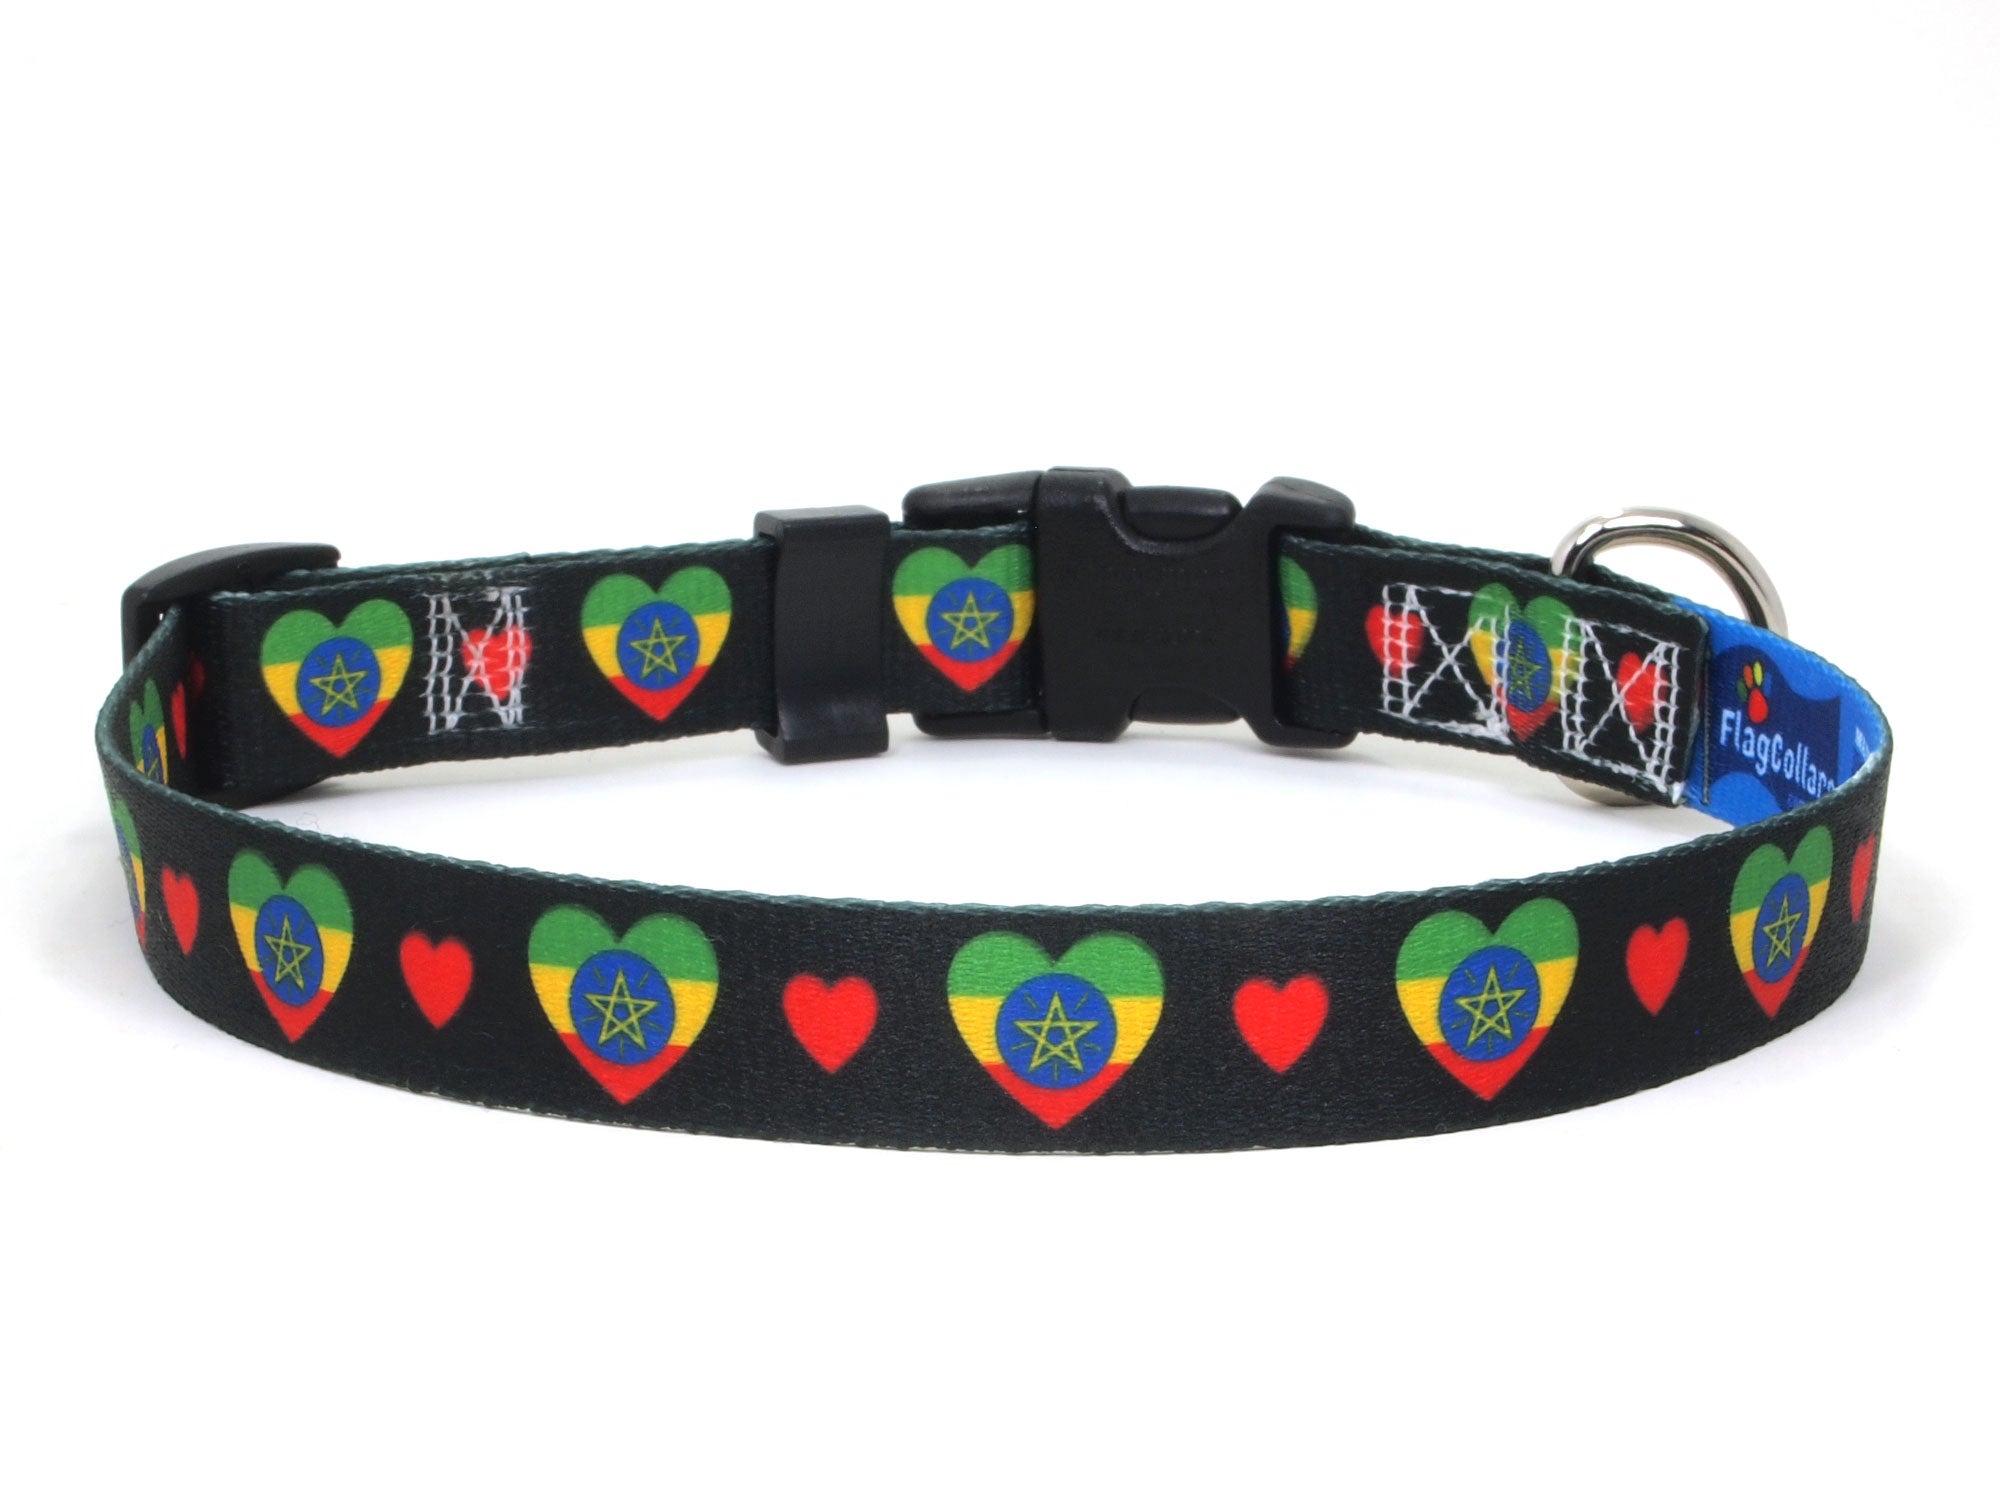 Dog Collar with Ethiopia Hearts Pattern in black